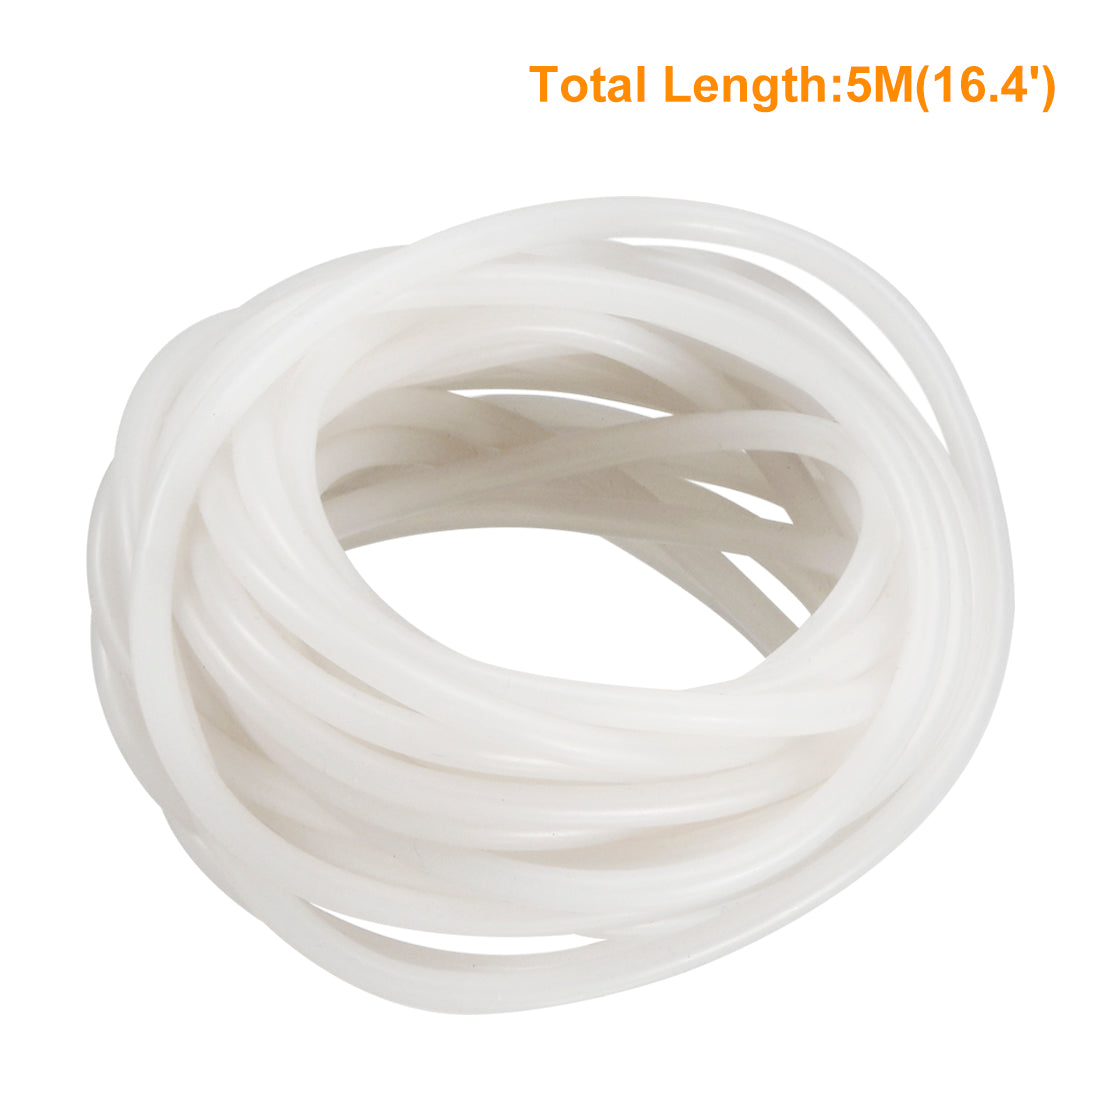 uxcell Uxcell Silicone Tube 10mm ID X 12mm OD 16.4 Feet Flexible Silicone Rubber Tubing Water Air Hose Pipe Translucent for Pump Transfer